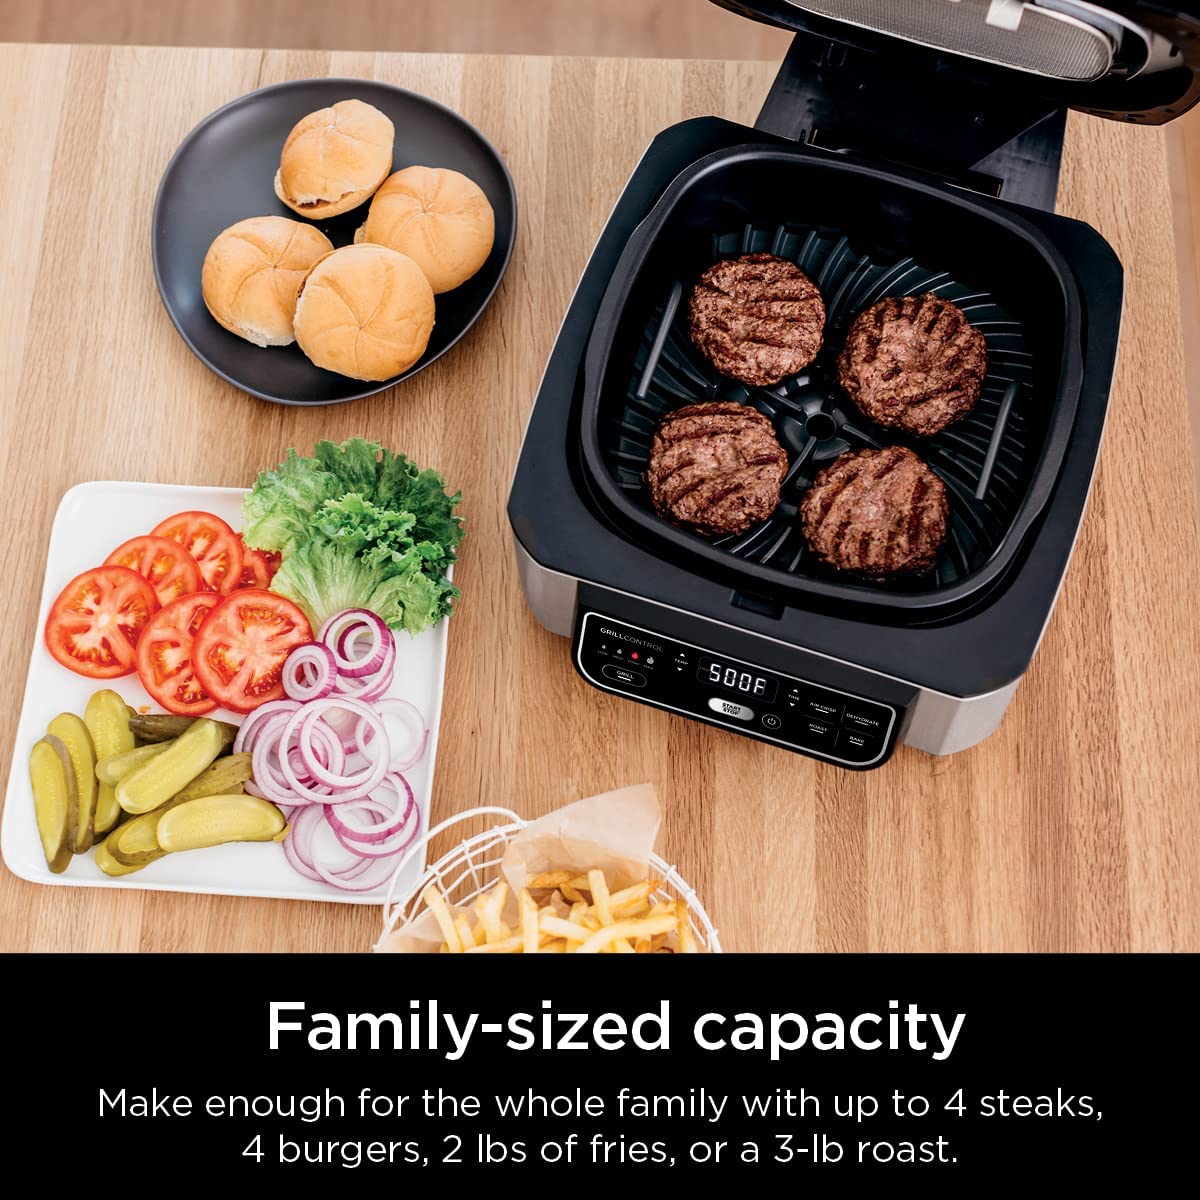 https://kitchenteller.com/wp-content/uploads/2022/10/Family-sized-capacity-Ninja-Foodi-5-in-1-Indoor-Grill-with-Air-Fryer-Review.jpg